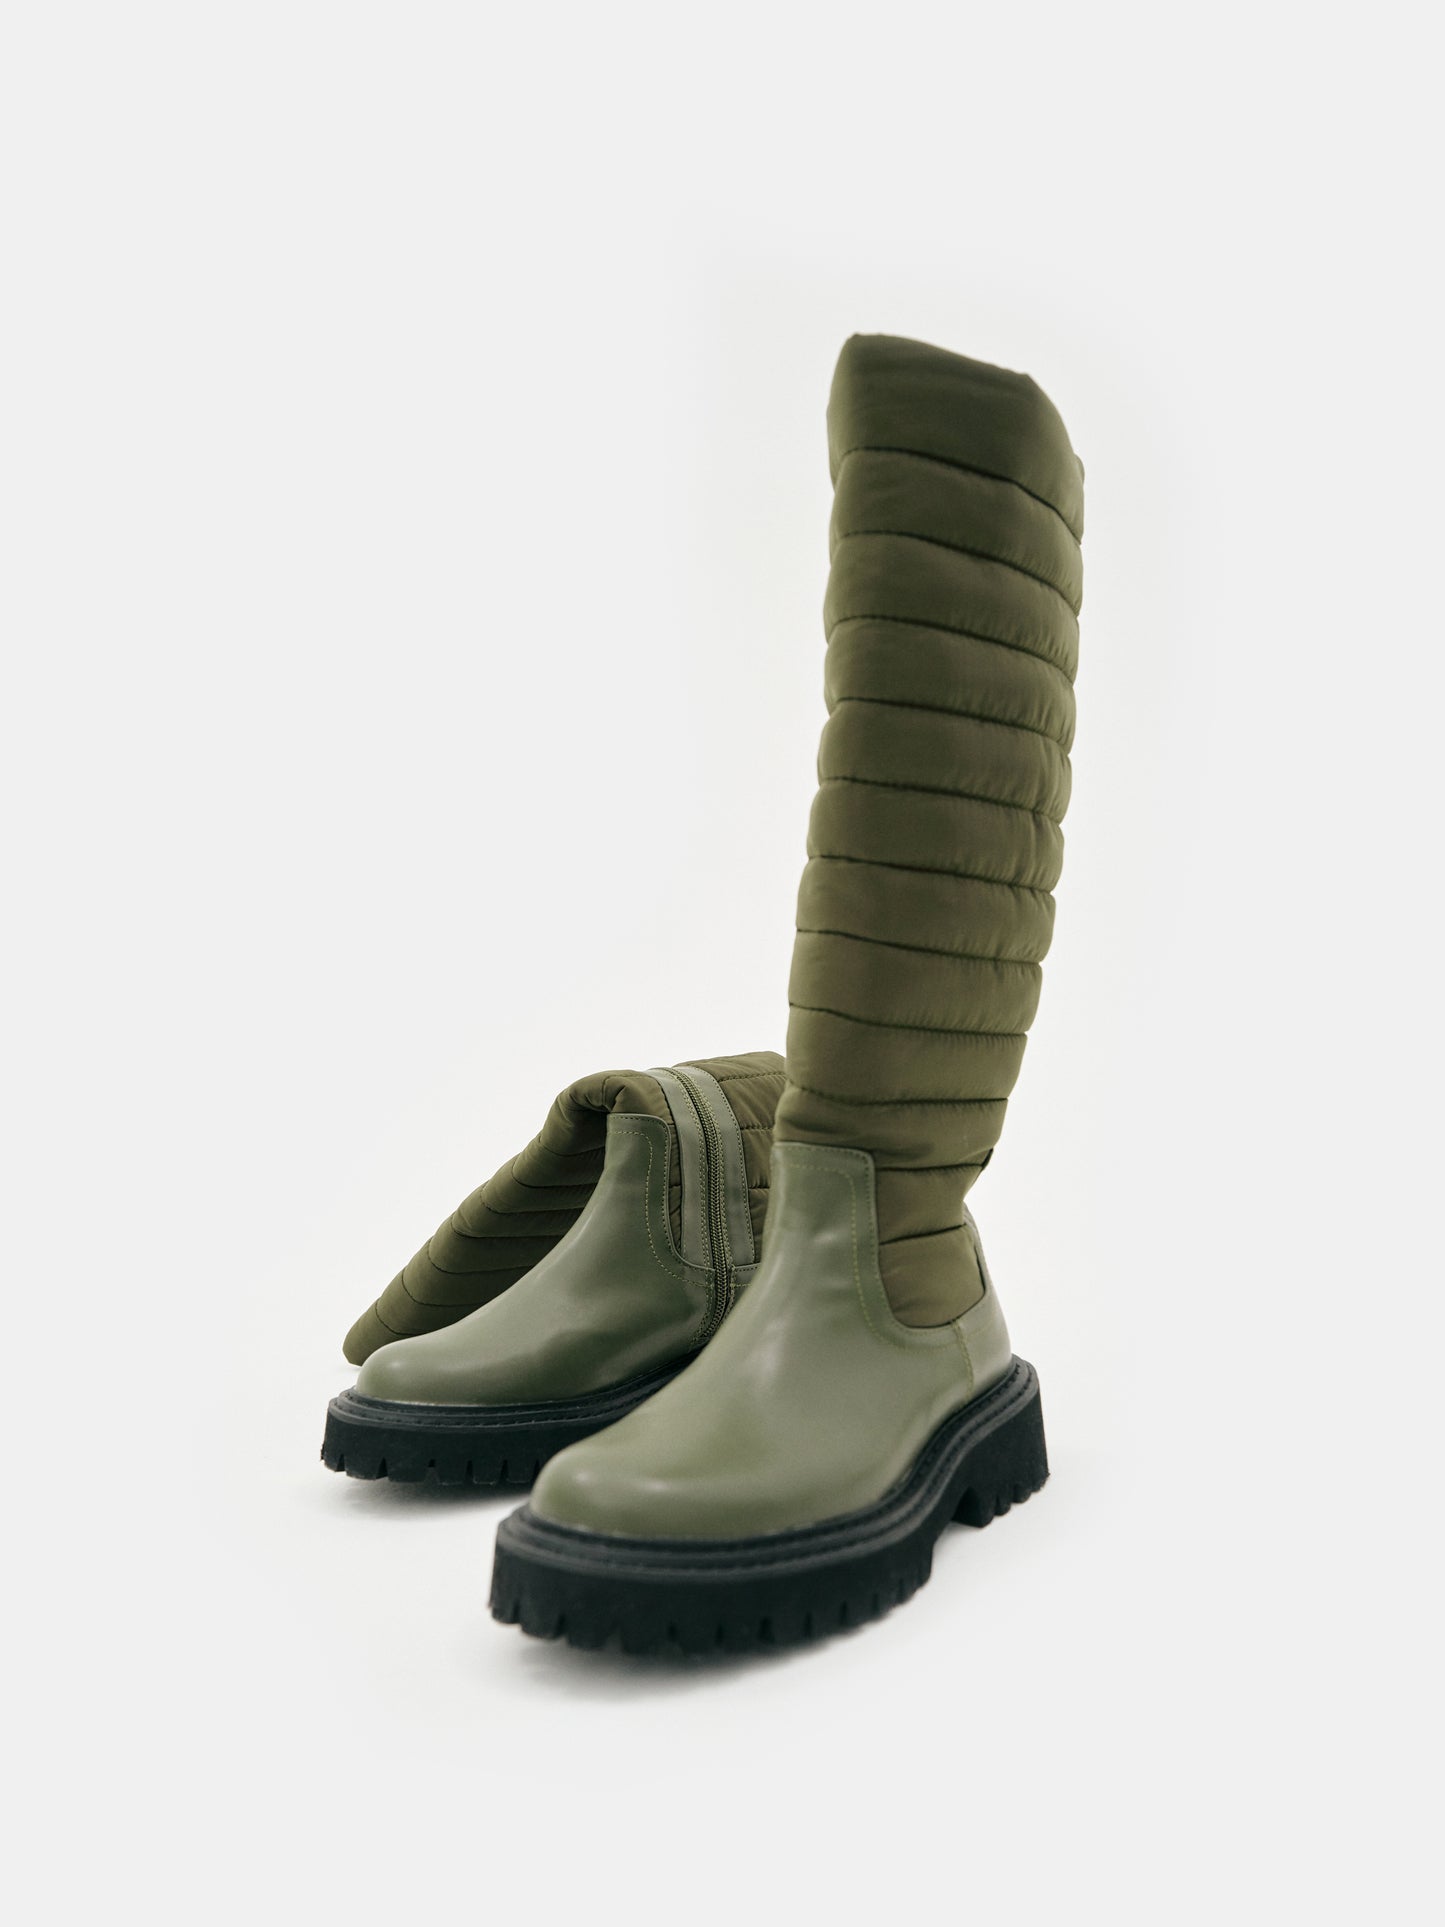 Padded Faux-Leather Boots, Khaki